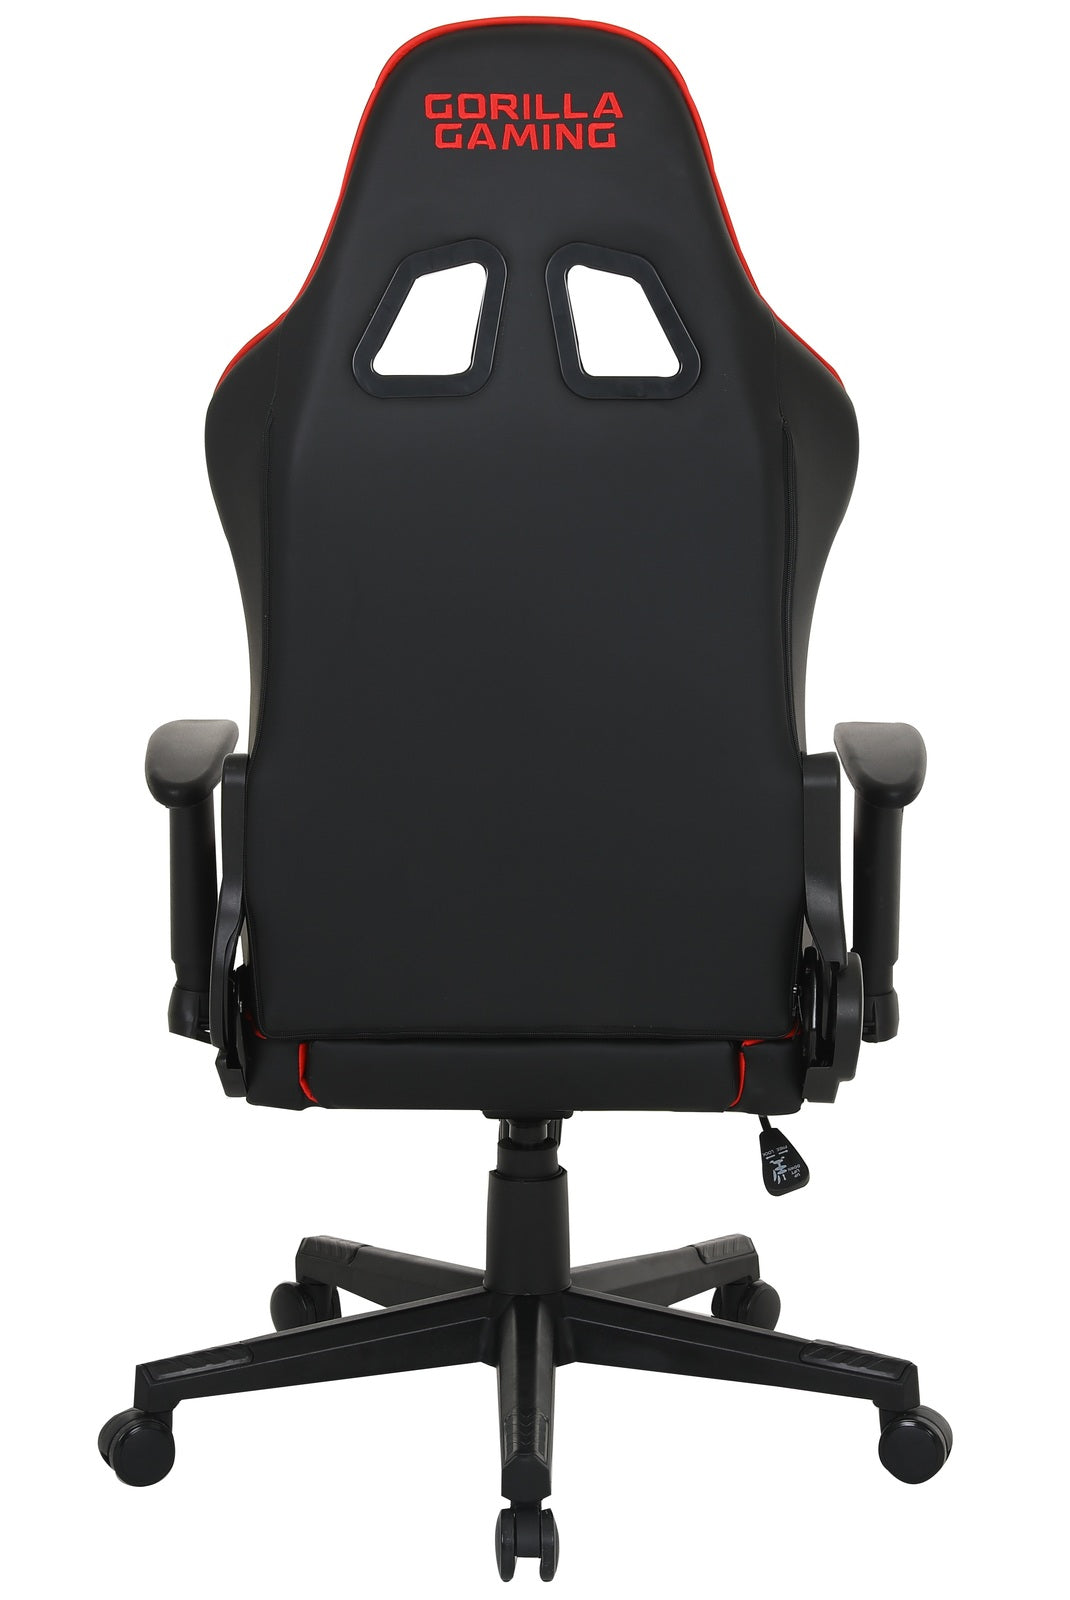 Gorilla Gaming Commander Chair - Black/Red - Xbox Series X